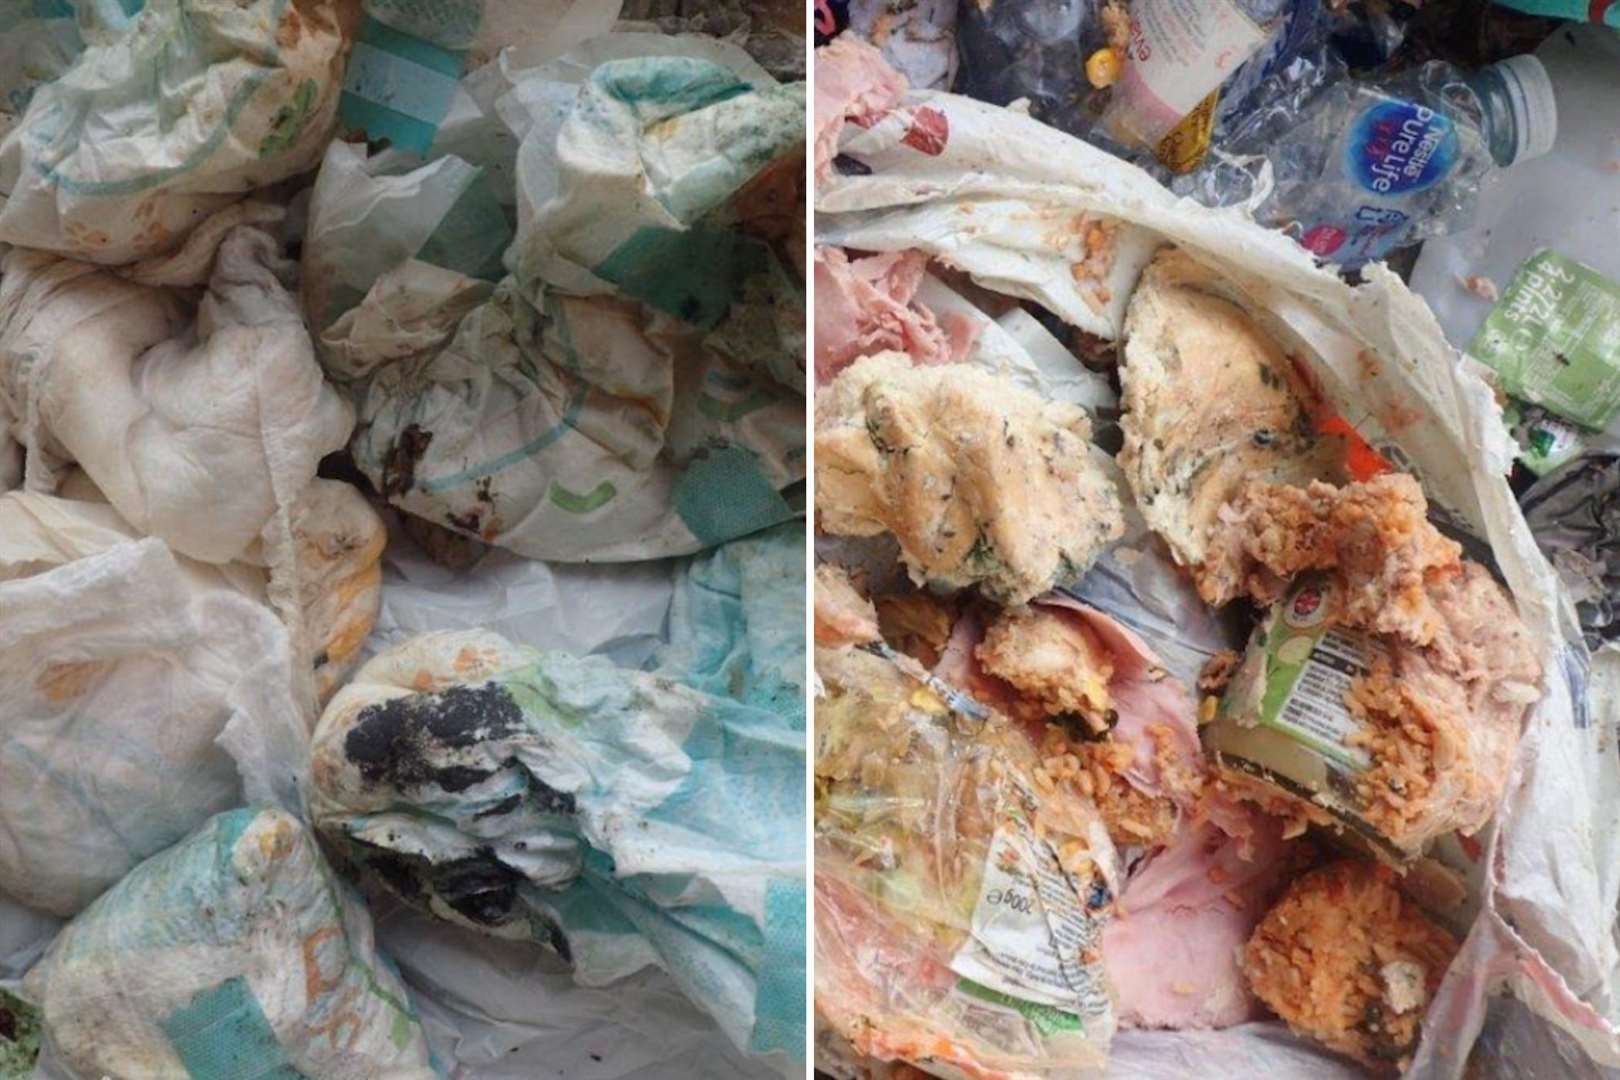 Food and dirty nappies have been found in recycling bins